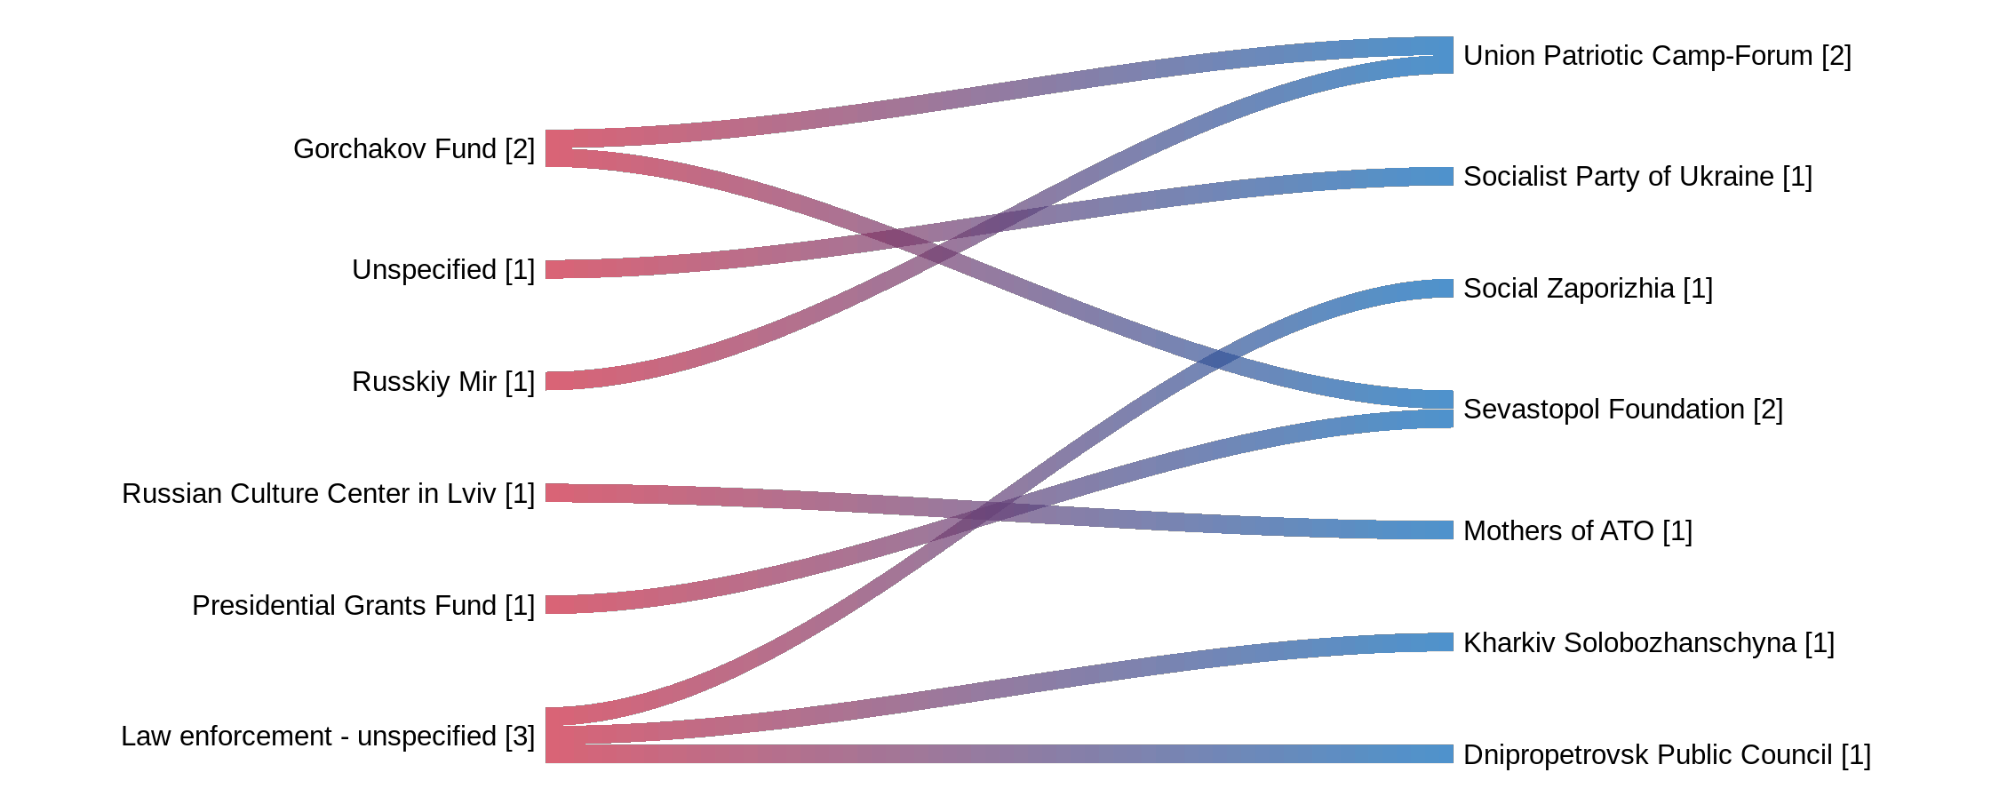 A sankey diagram of Russian projects going to Ukrainian organizations